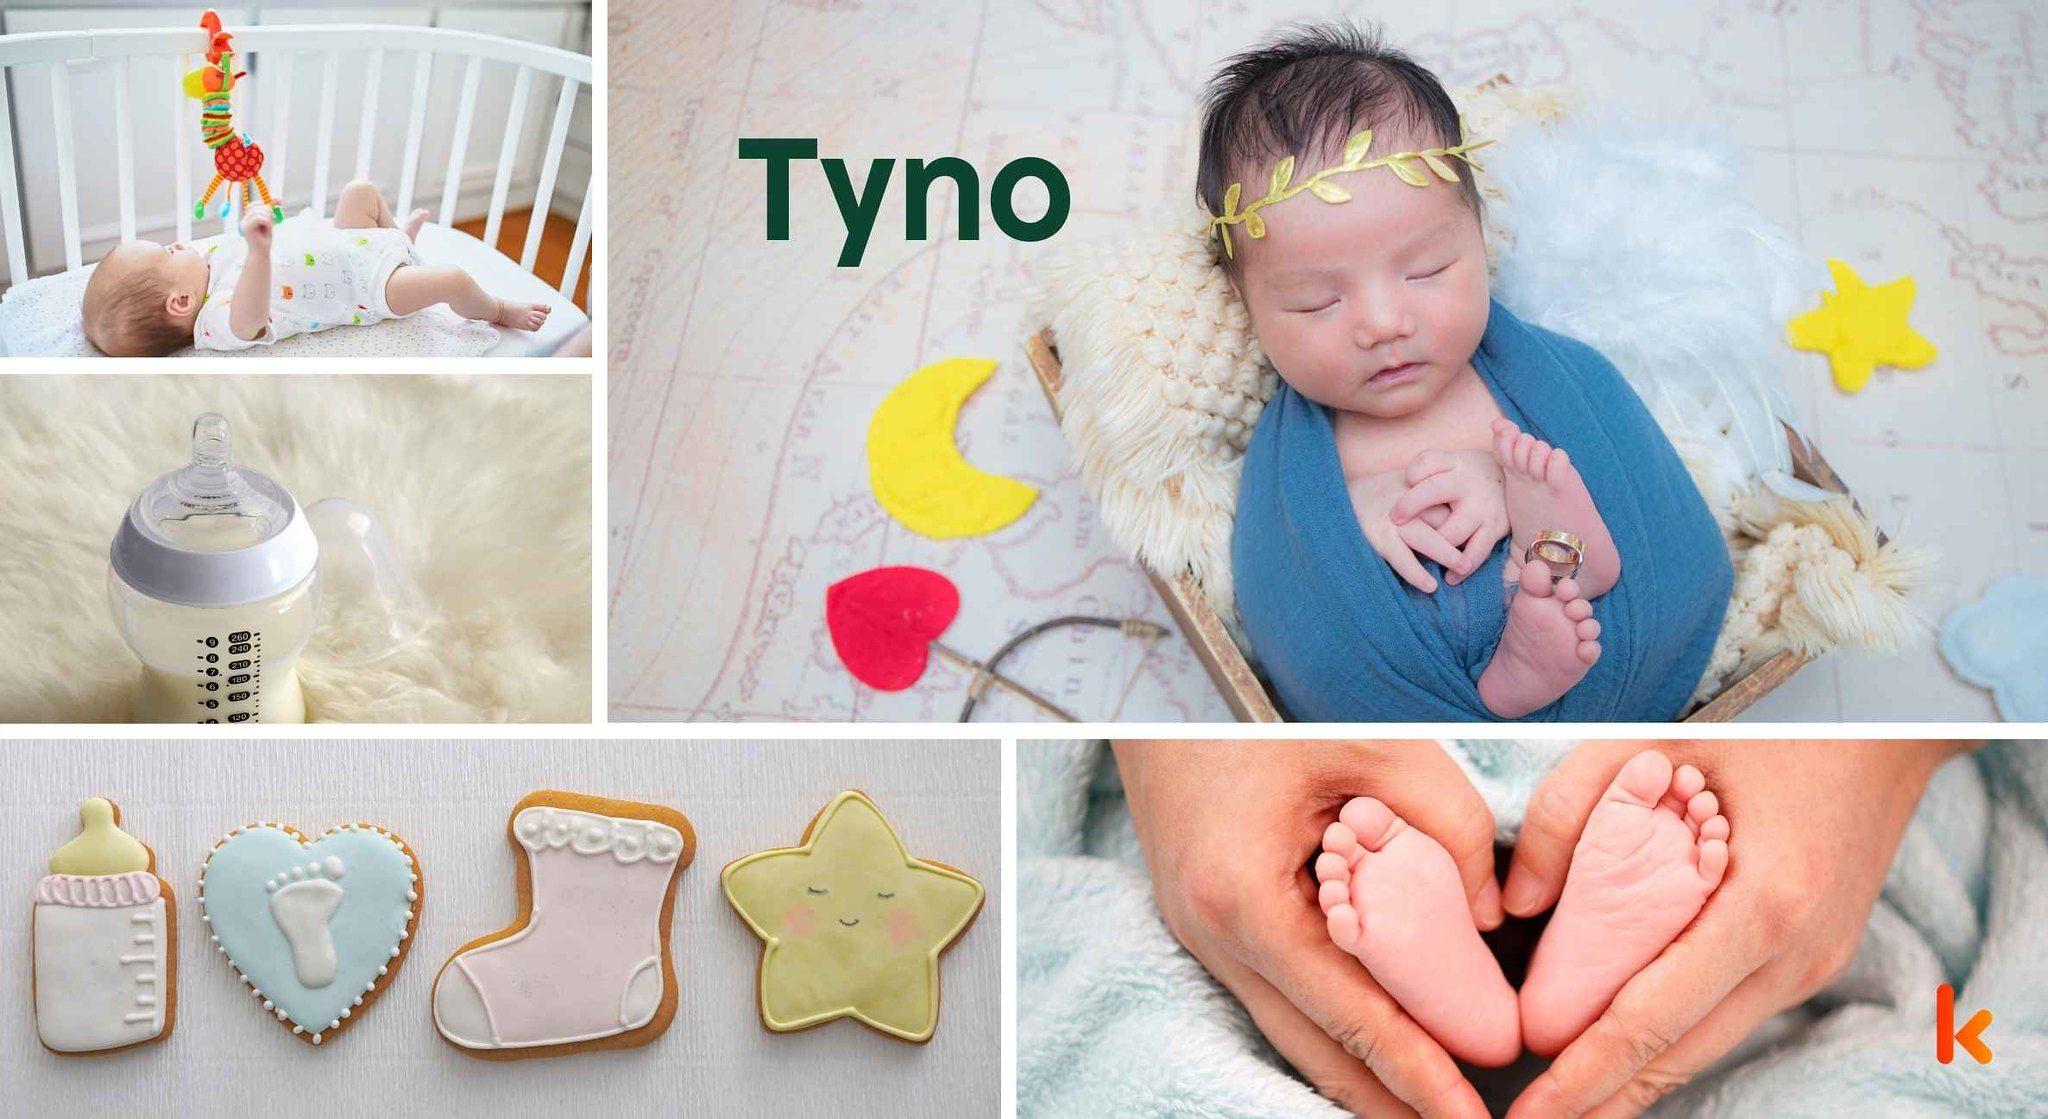 Meaning of the name Tyno